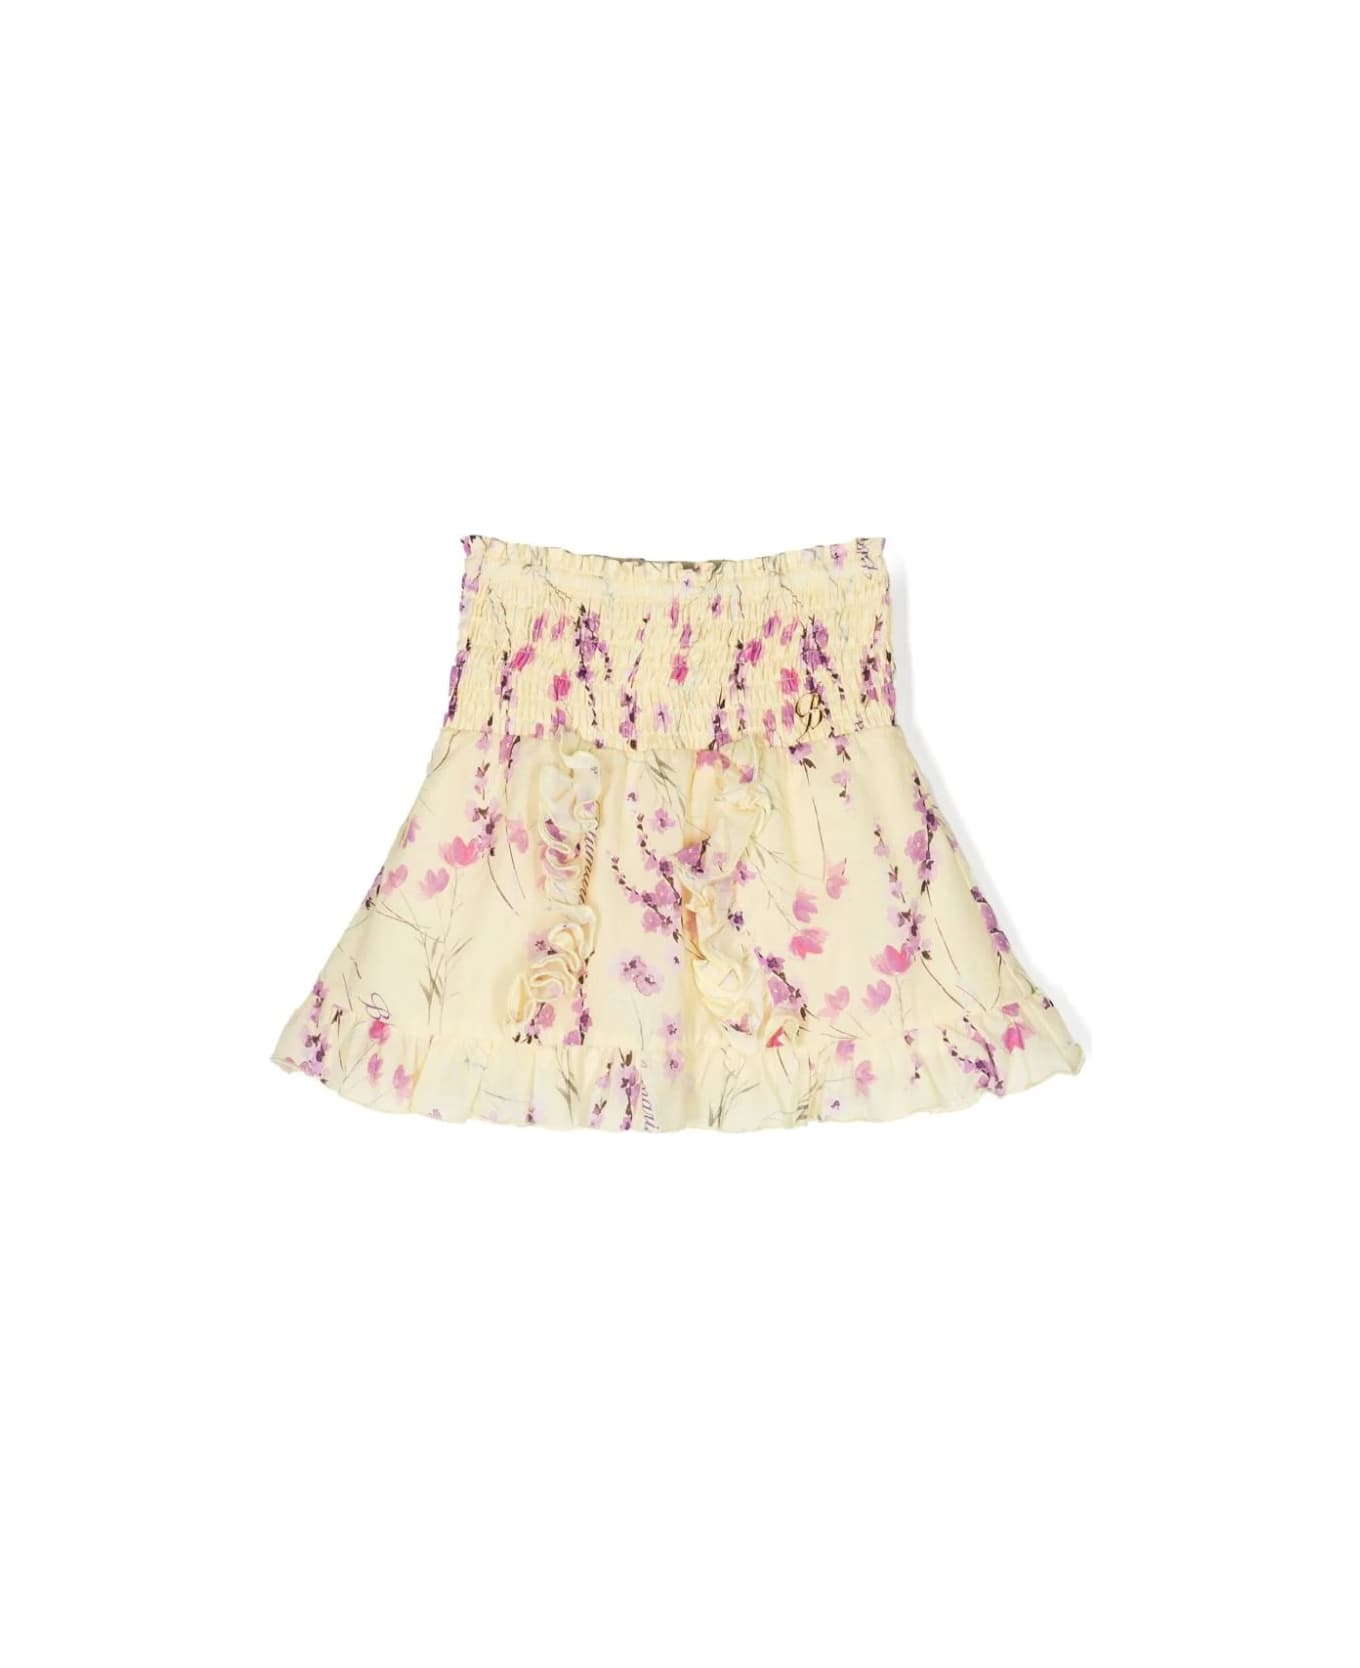 Miss Blumarine Pastel Yellow Miniskirt With Ruffles And Floral Print - Giallo